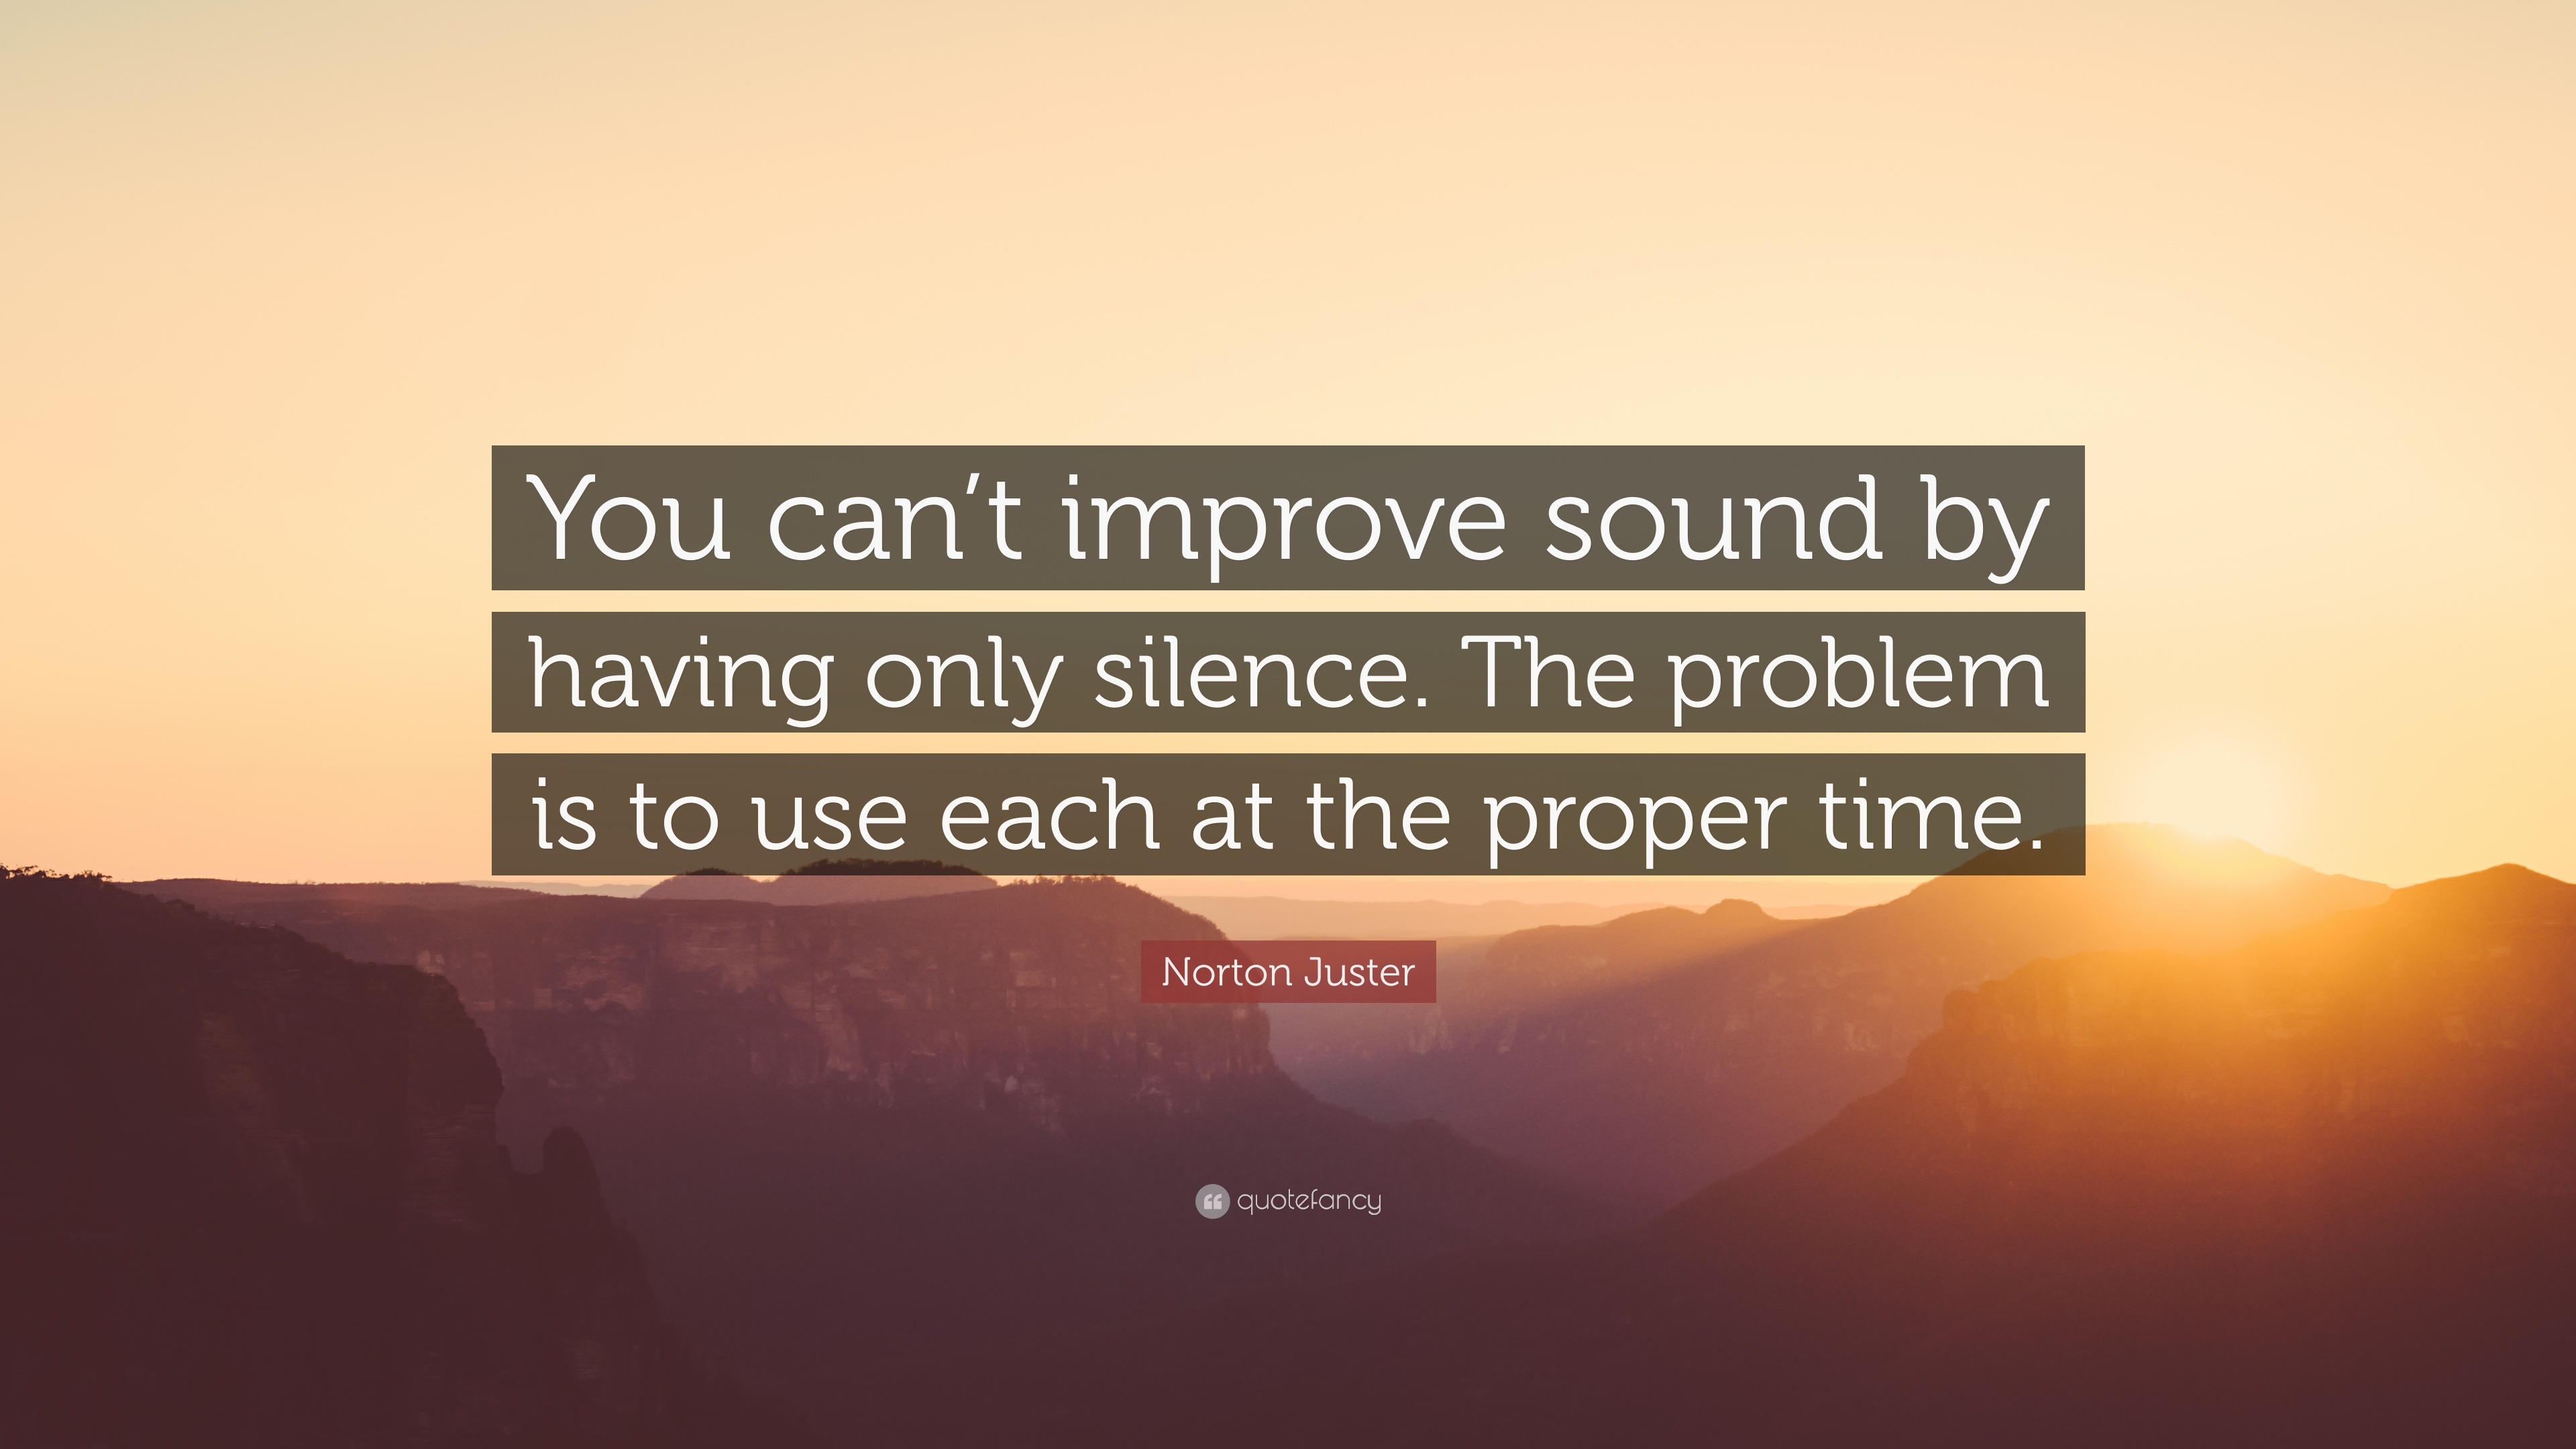 Norton Juster Quote: “You can’t improve sound by having only silence ...